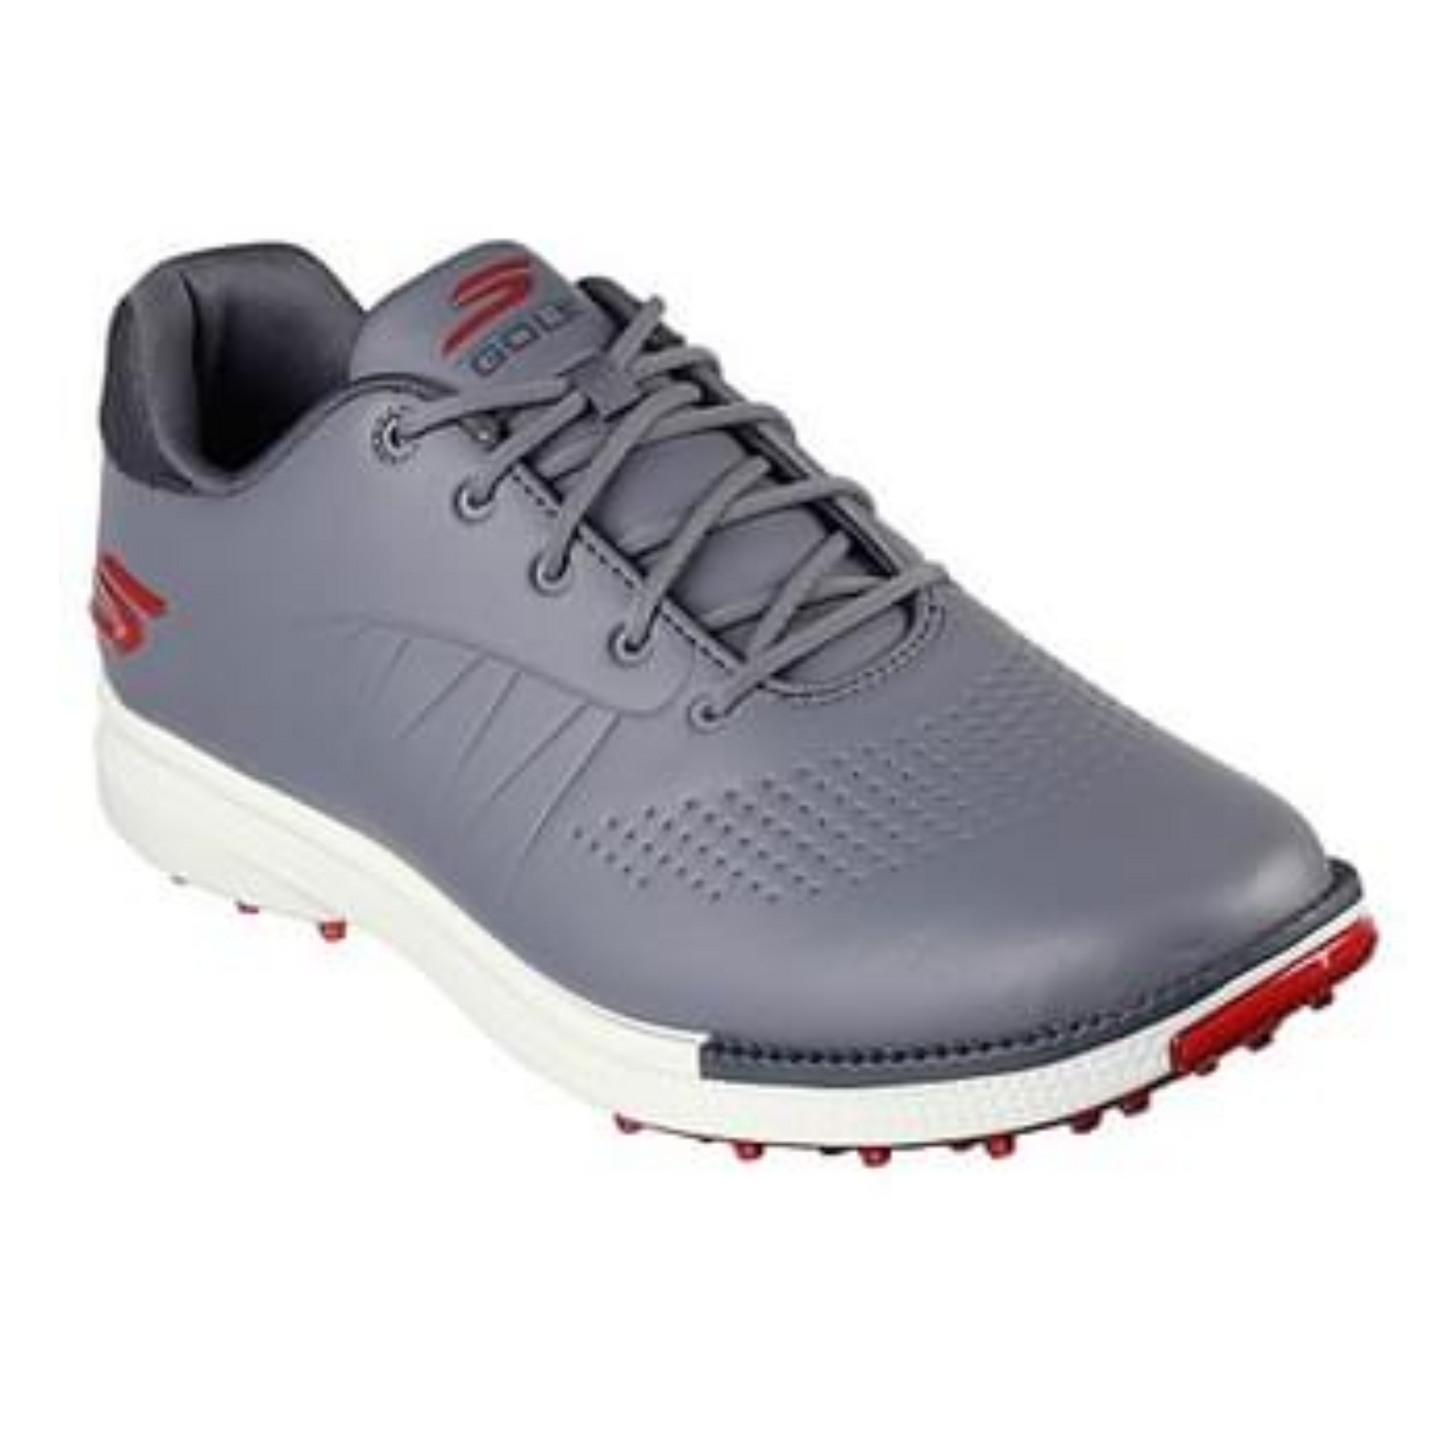 Skechers Go Golf Tempo GF Spikeless Golf Shoes 214099 - Grey Red   